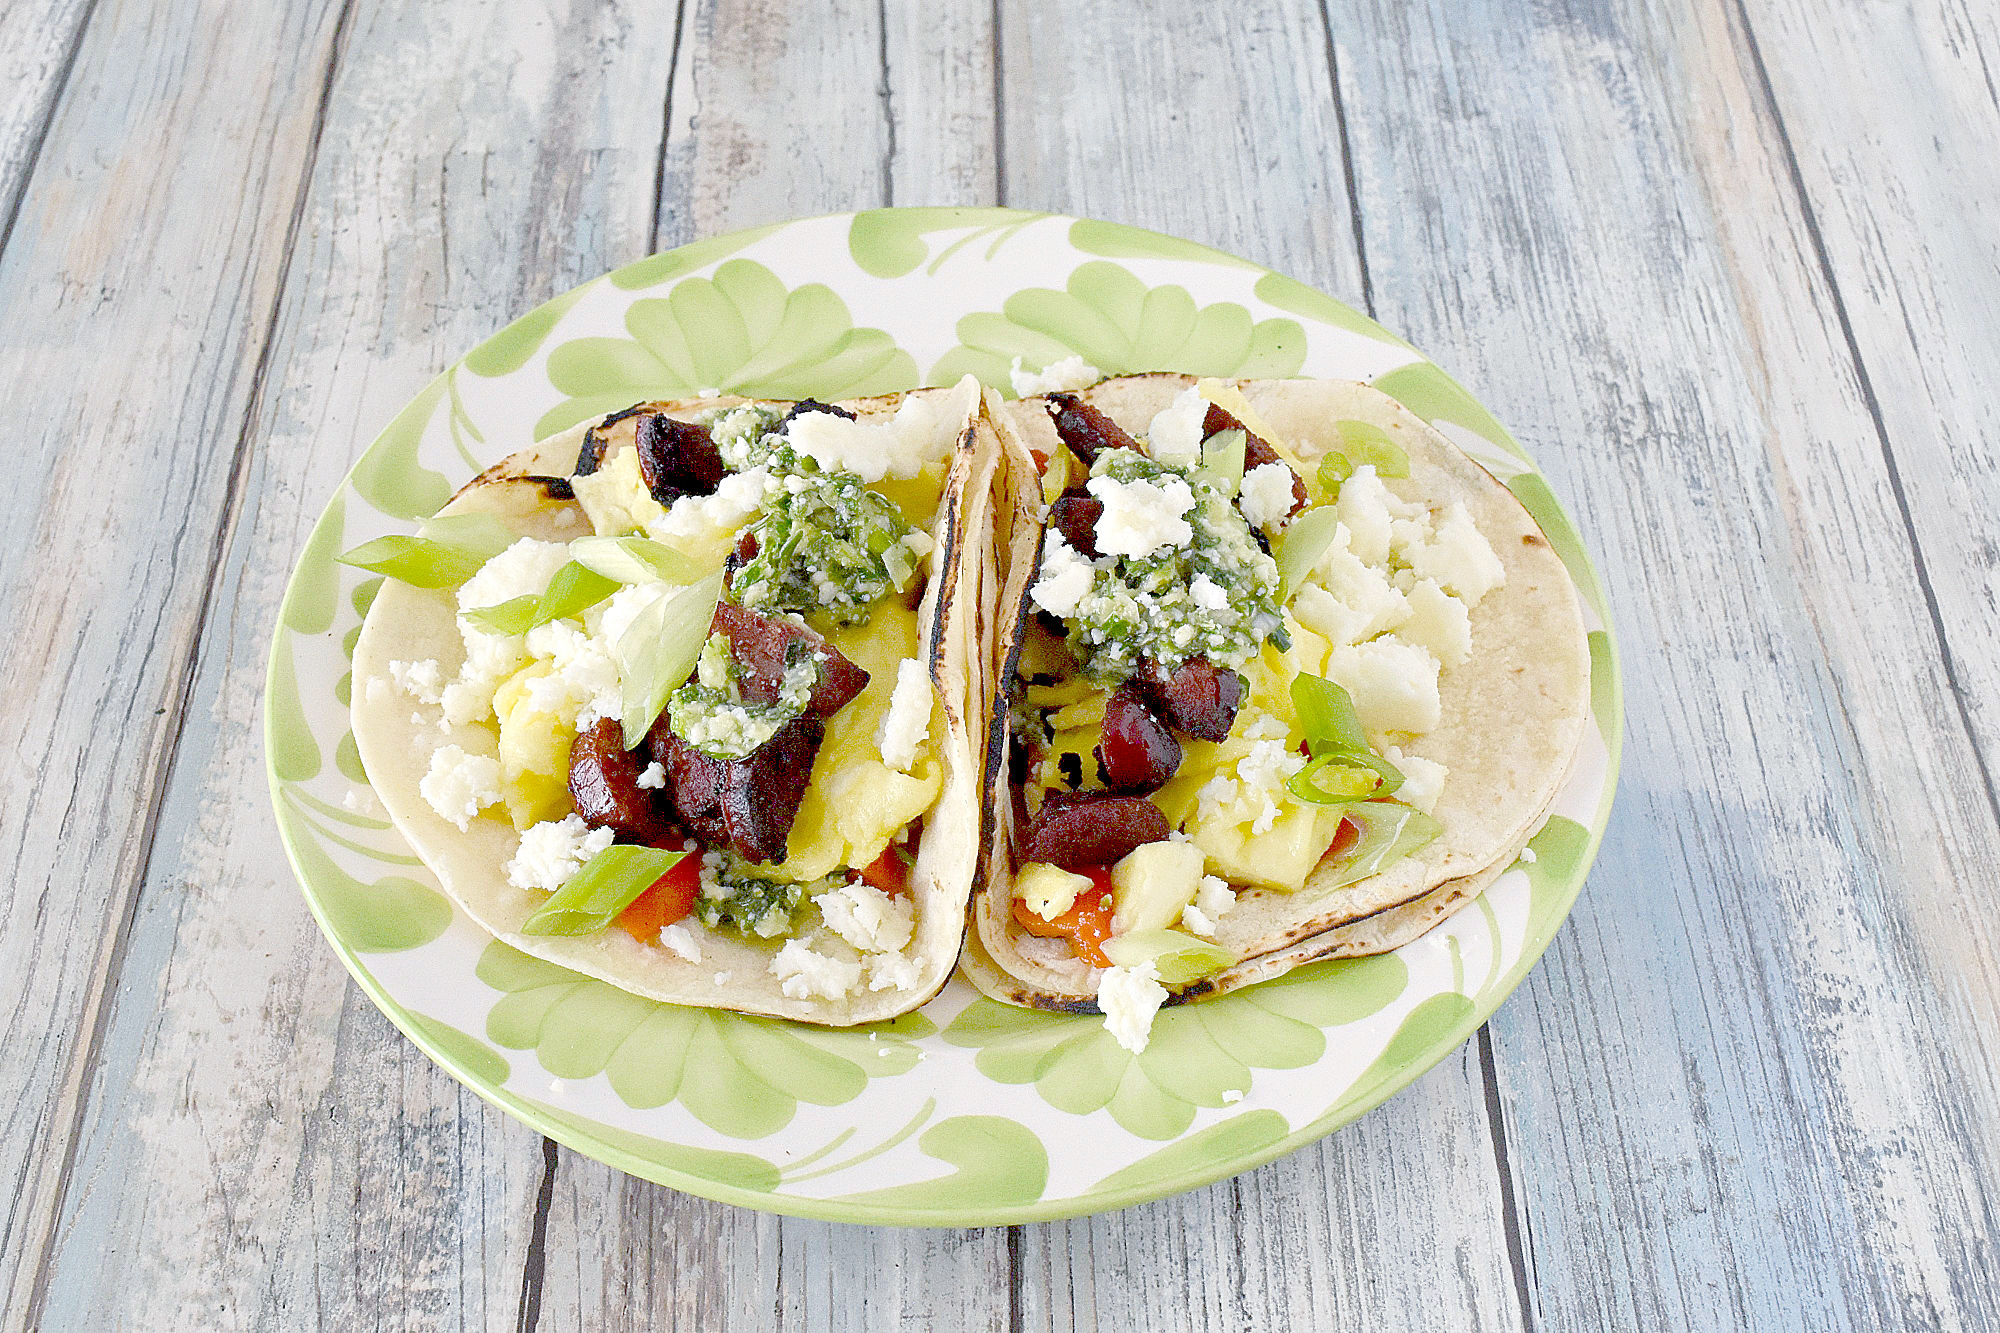 Chorizo and Egg Breakfast Tacos have such delicious flavor! From the slightly spicy chorizo to the fresh chimichurri these tacos have so much flavor. #OurFamilyTable